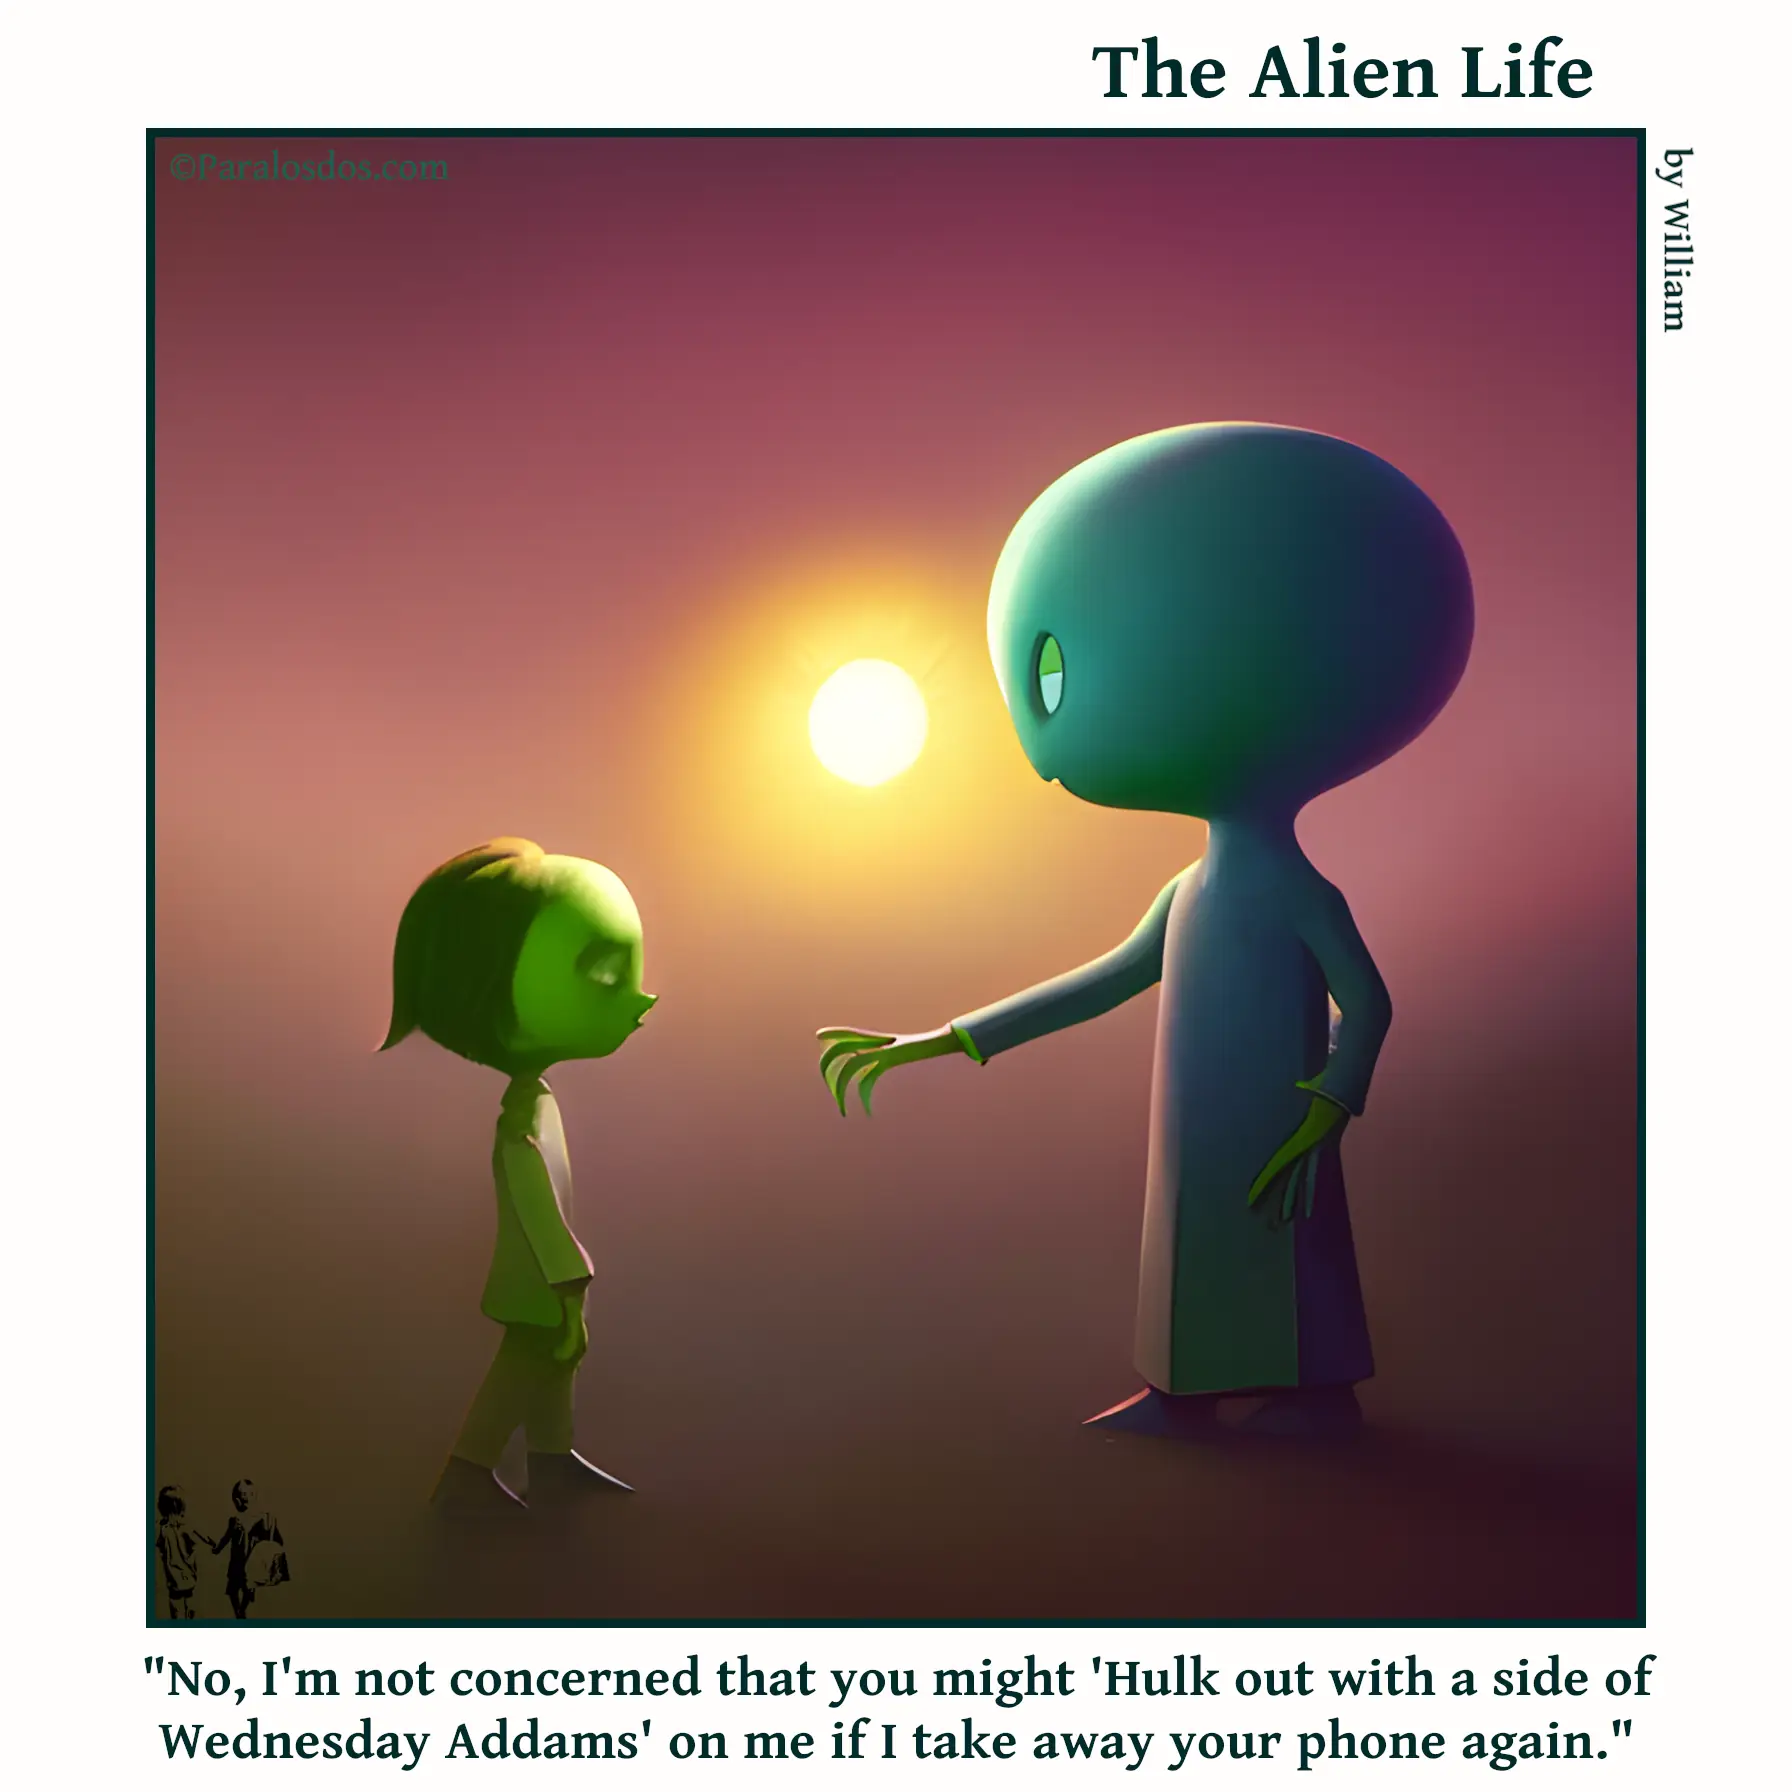 The Alien Life, one panel Comic. A green alien child is standing in front of an adult alien. The caption reads: "No, I'm not concerned that you might 'Hulk out with a side of Wednesday Addams' on me if I take away your phone again."